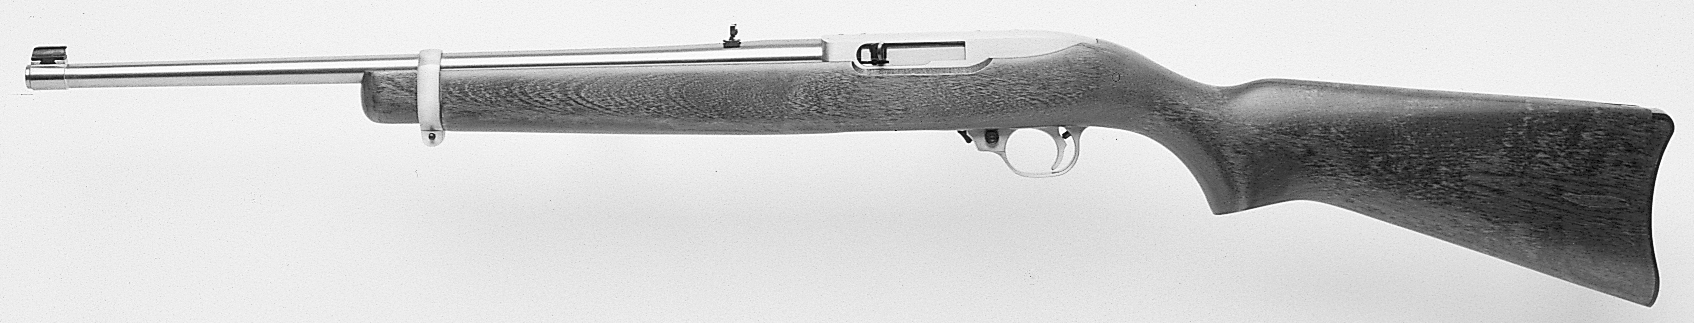 10/22 Standard Carbine Stainless Steel